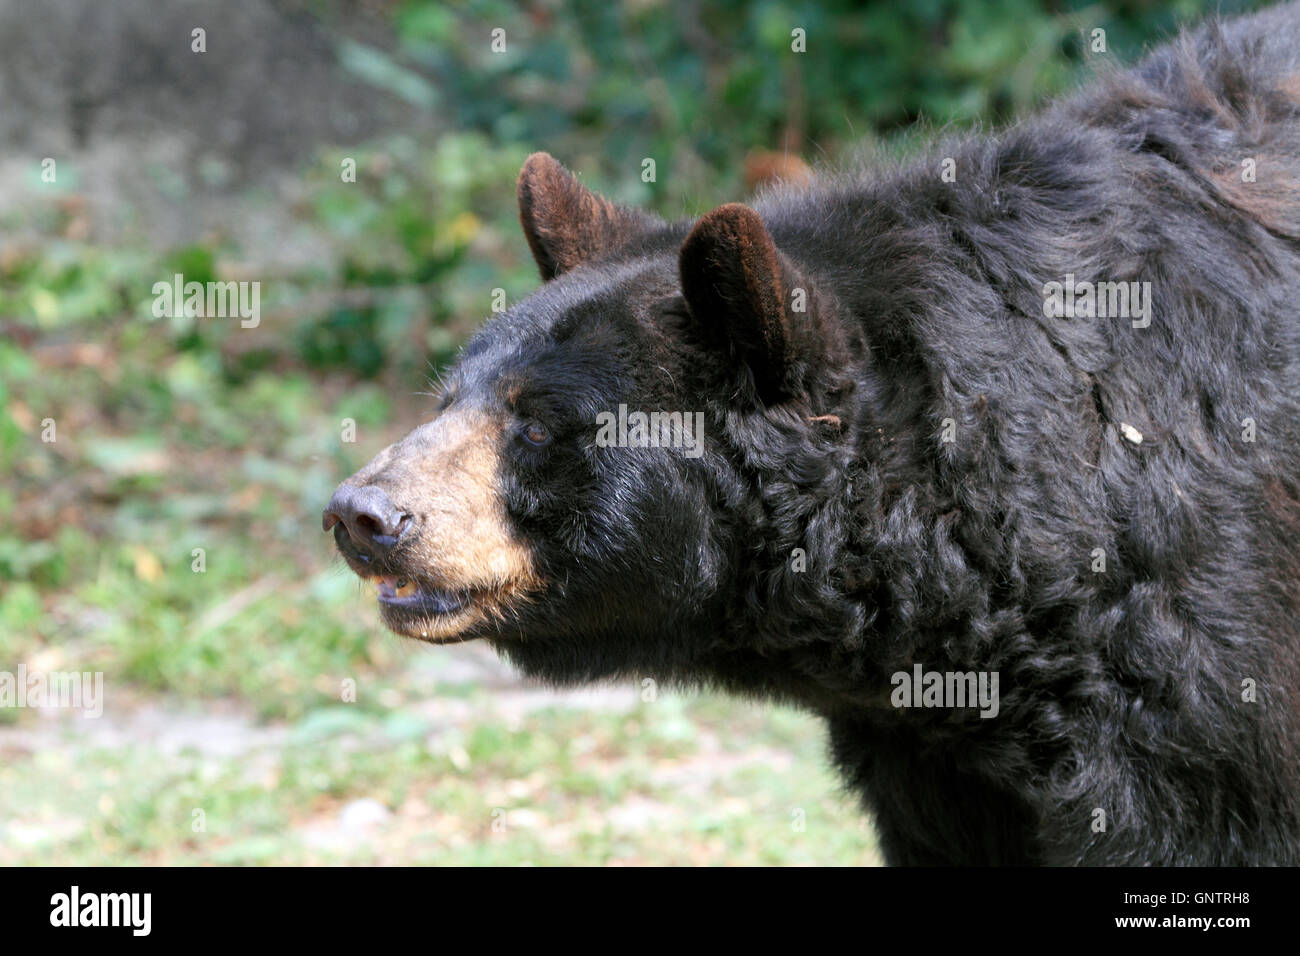 American Black Bear, Ursus americanus, at the Popcorn Park Zoo Animal Rescue Sanctuary, Forked River, New Jersey, USA Stock Photo